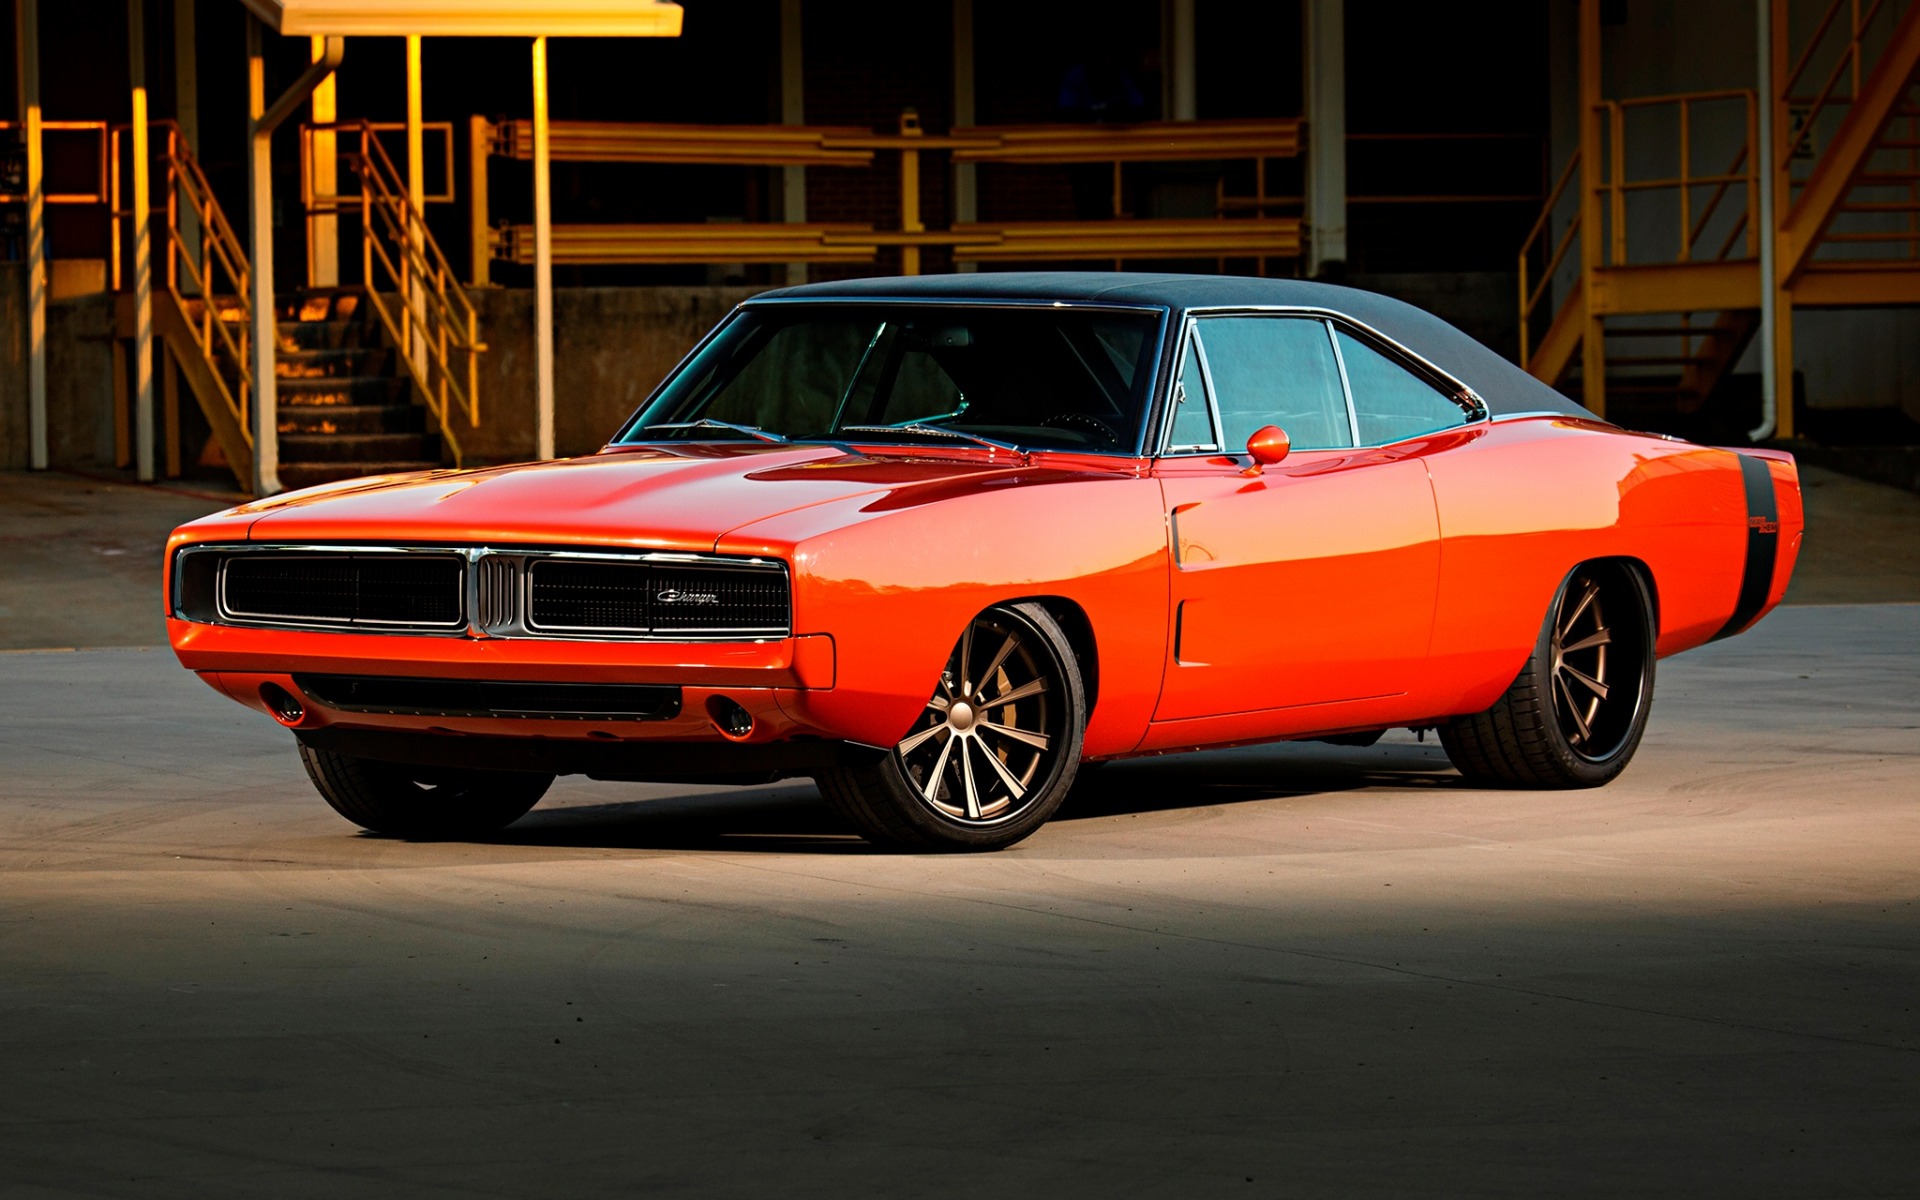 Dodge Charger, Tuning, Muscle Cars, 1969 Cars, Retro - Dodge Charger 2 Generation - HD Wallpaper 